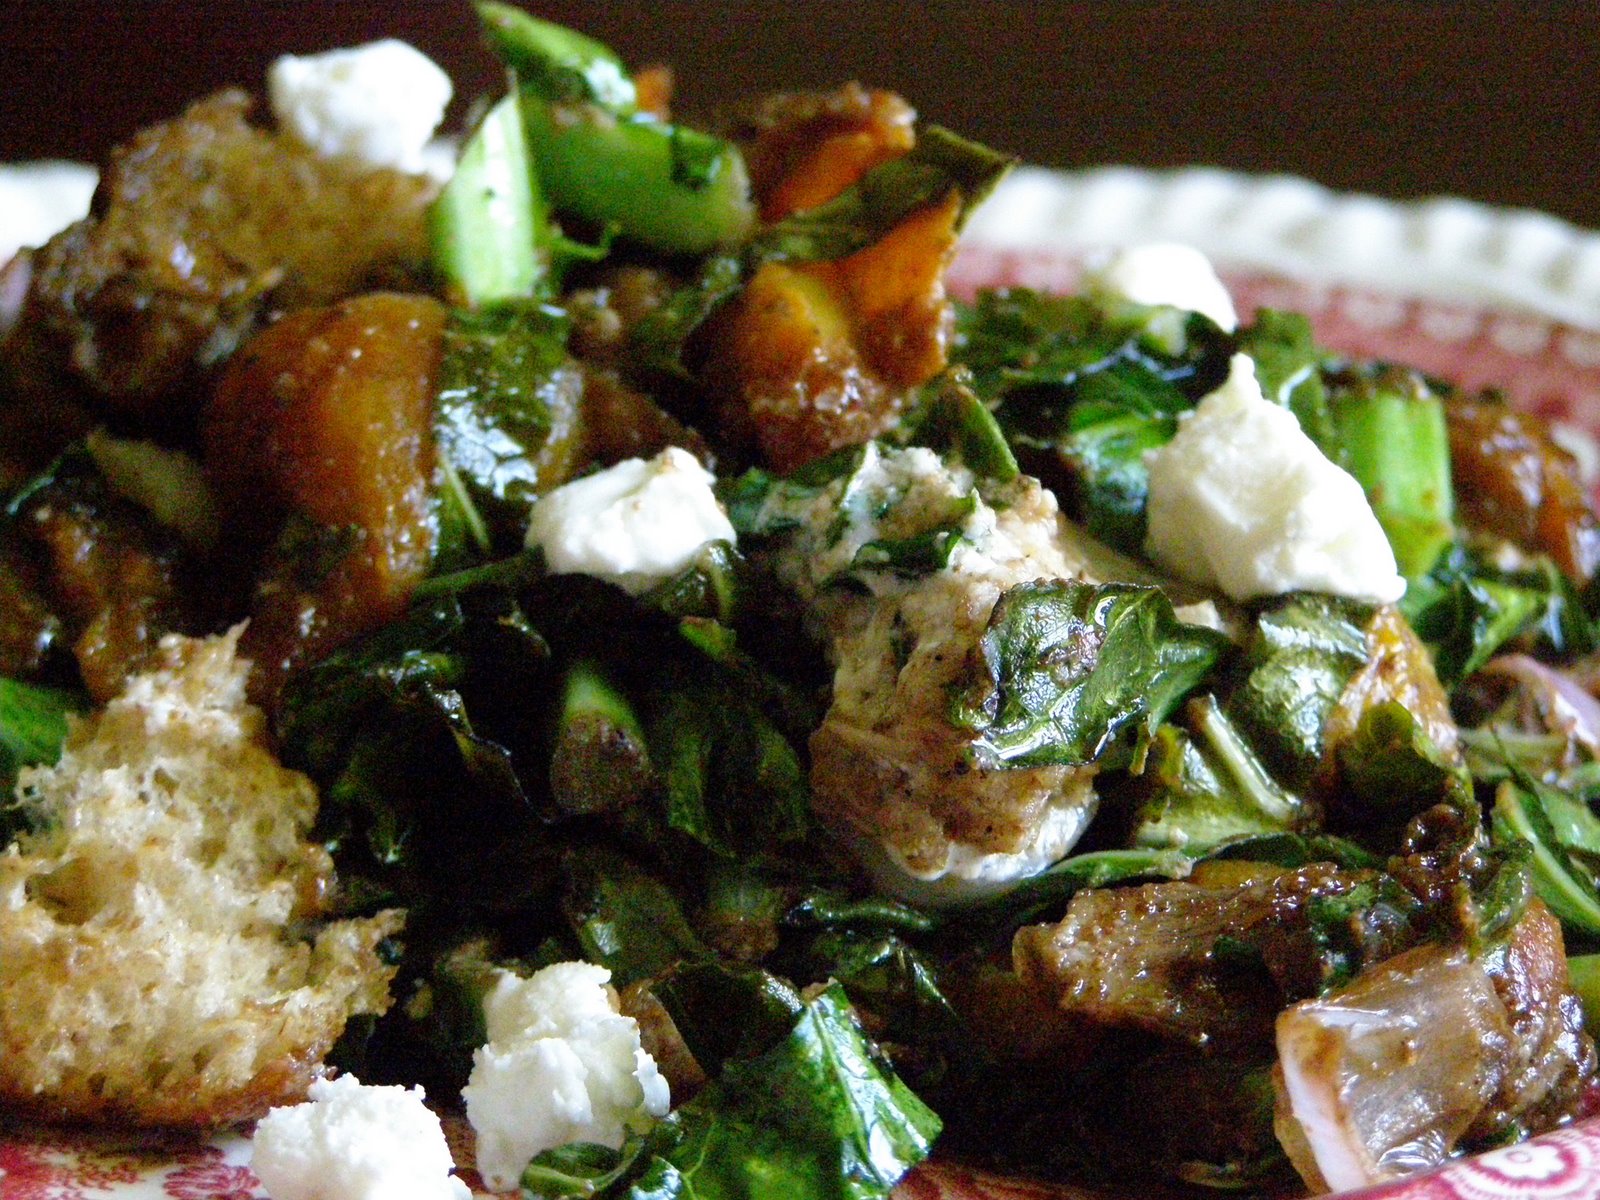 [kale+with+roasted+peppers,+goat+cheese,+shallots+and+pain+de+campagne.JPG]